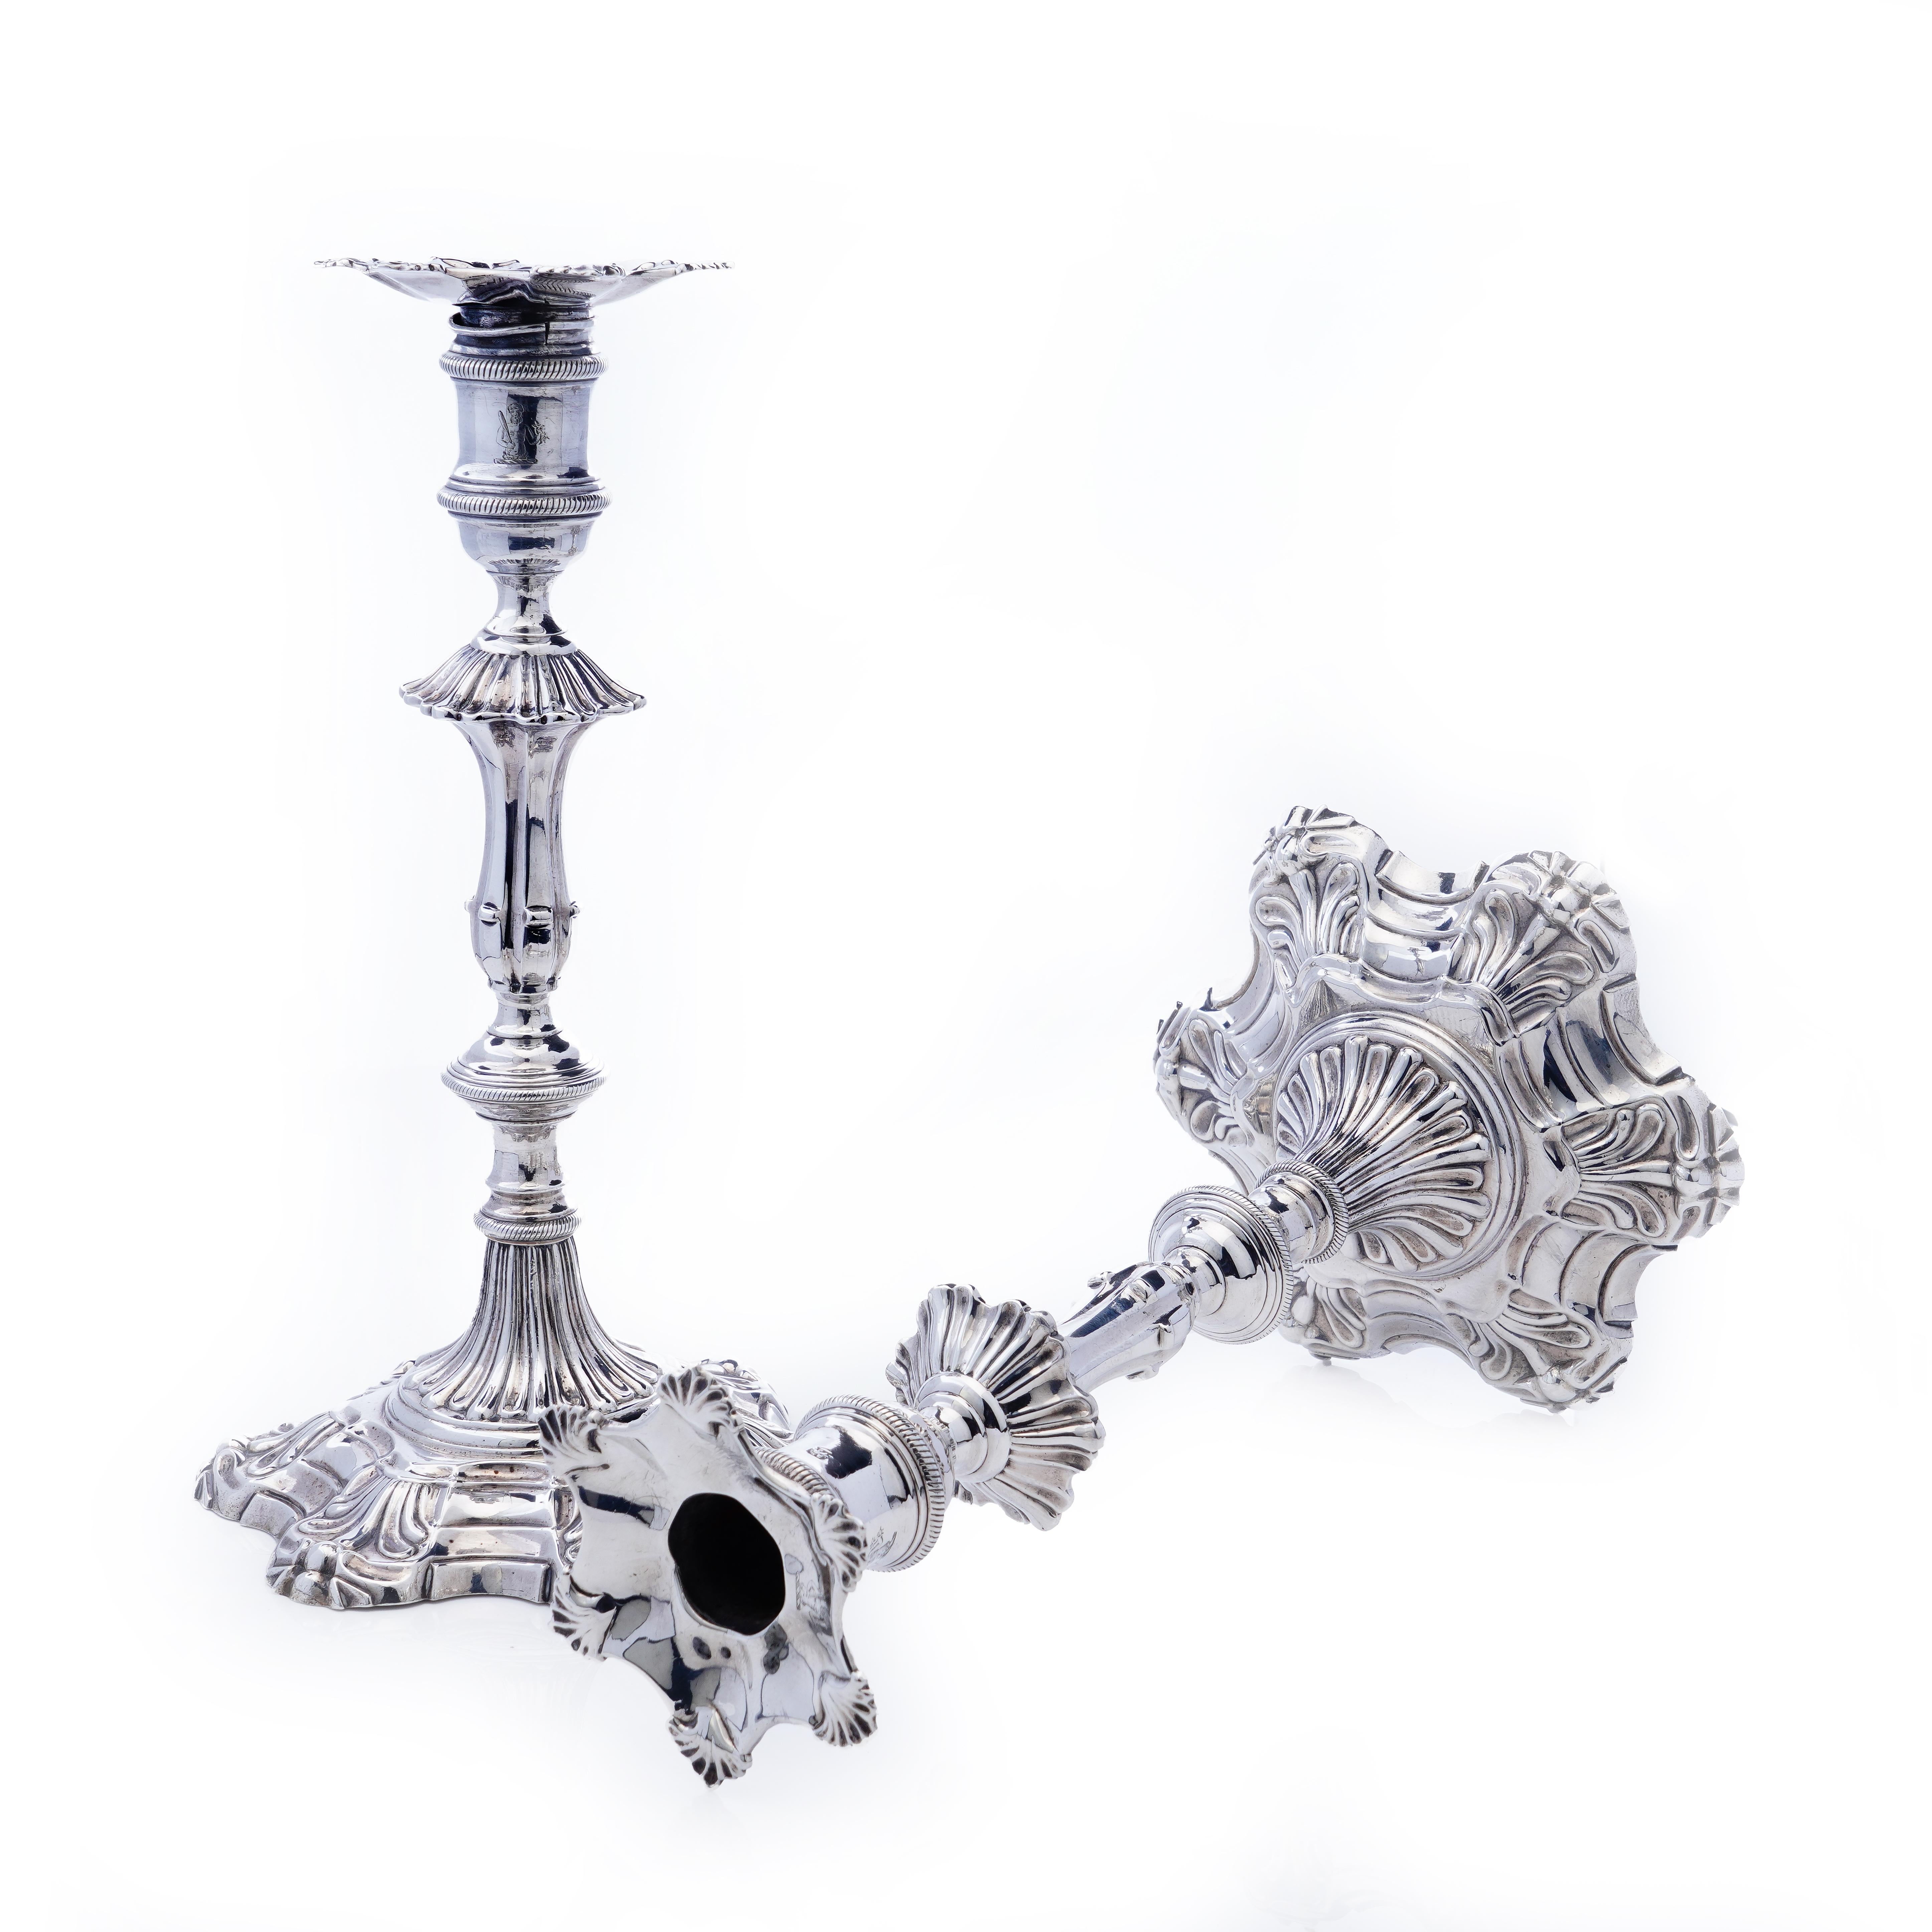 Antique pair of George II silver candlesticks
 Maker: James Morison
 Made in England, London, 1758
 Fully hallmarked.


Whether it's for dinner with friends or entertaining spirits in the attic, these candlesticks light your way. 
These rare